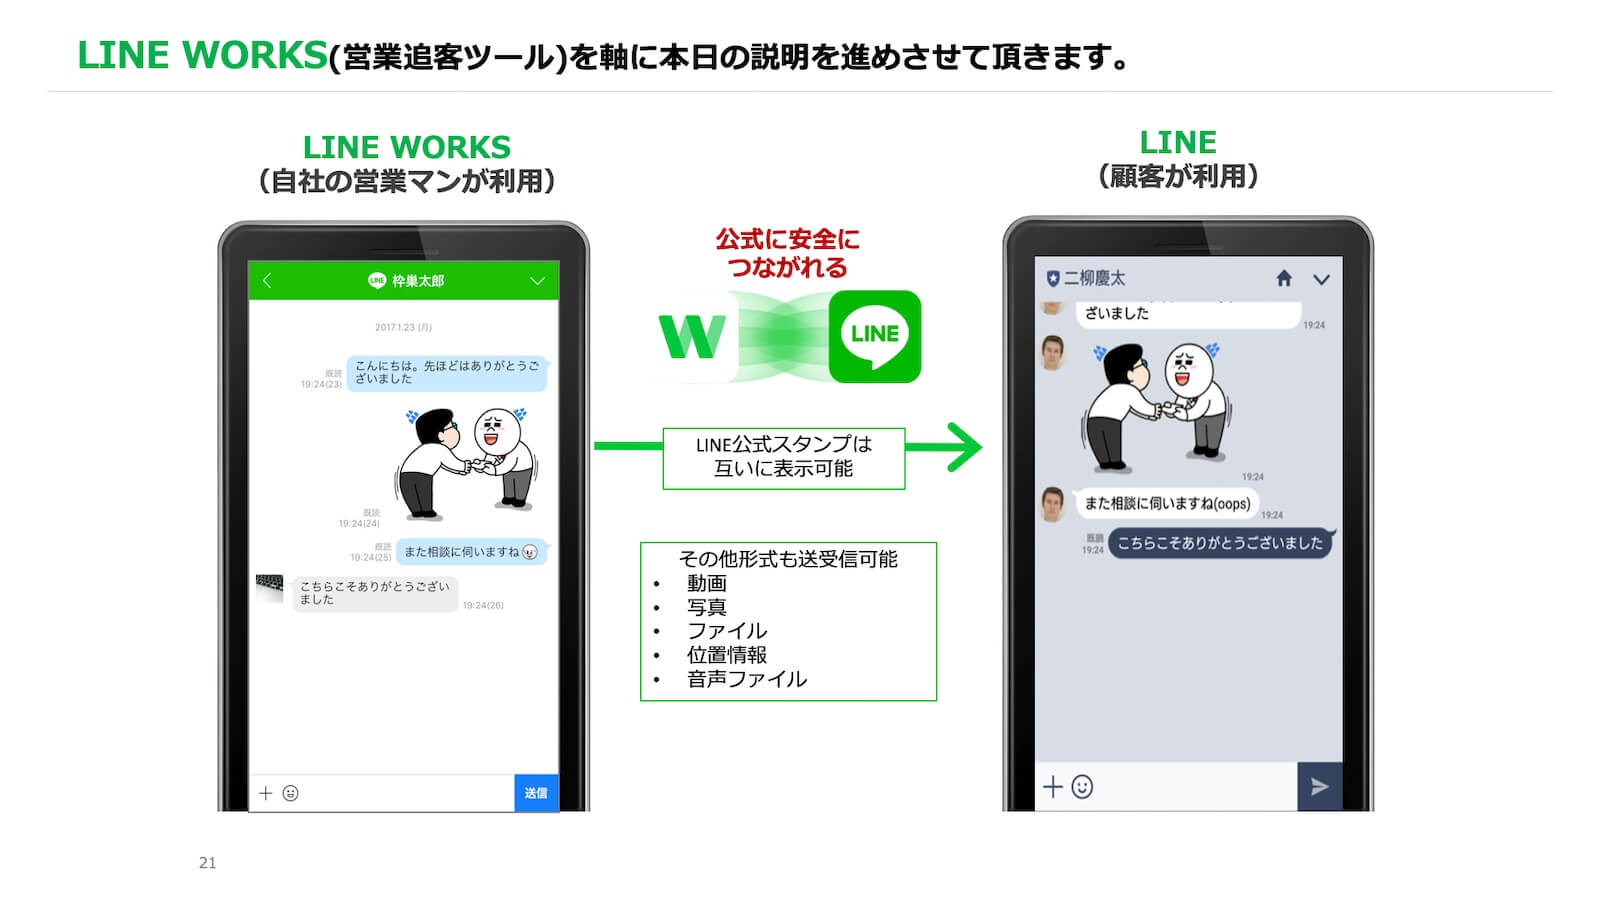 LINE WORKSの説明